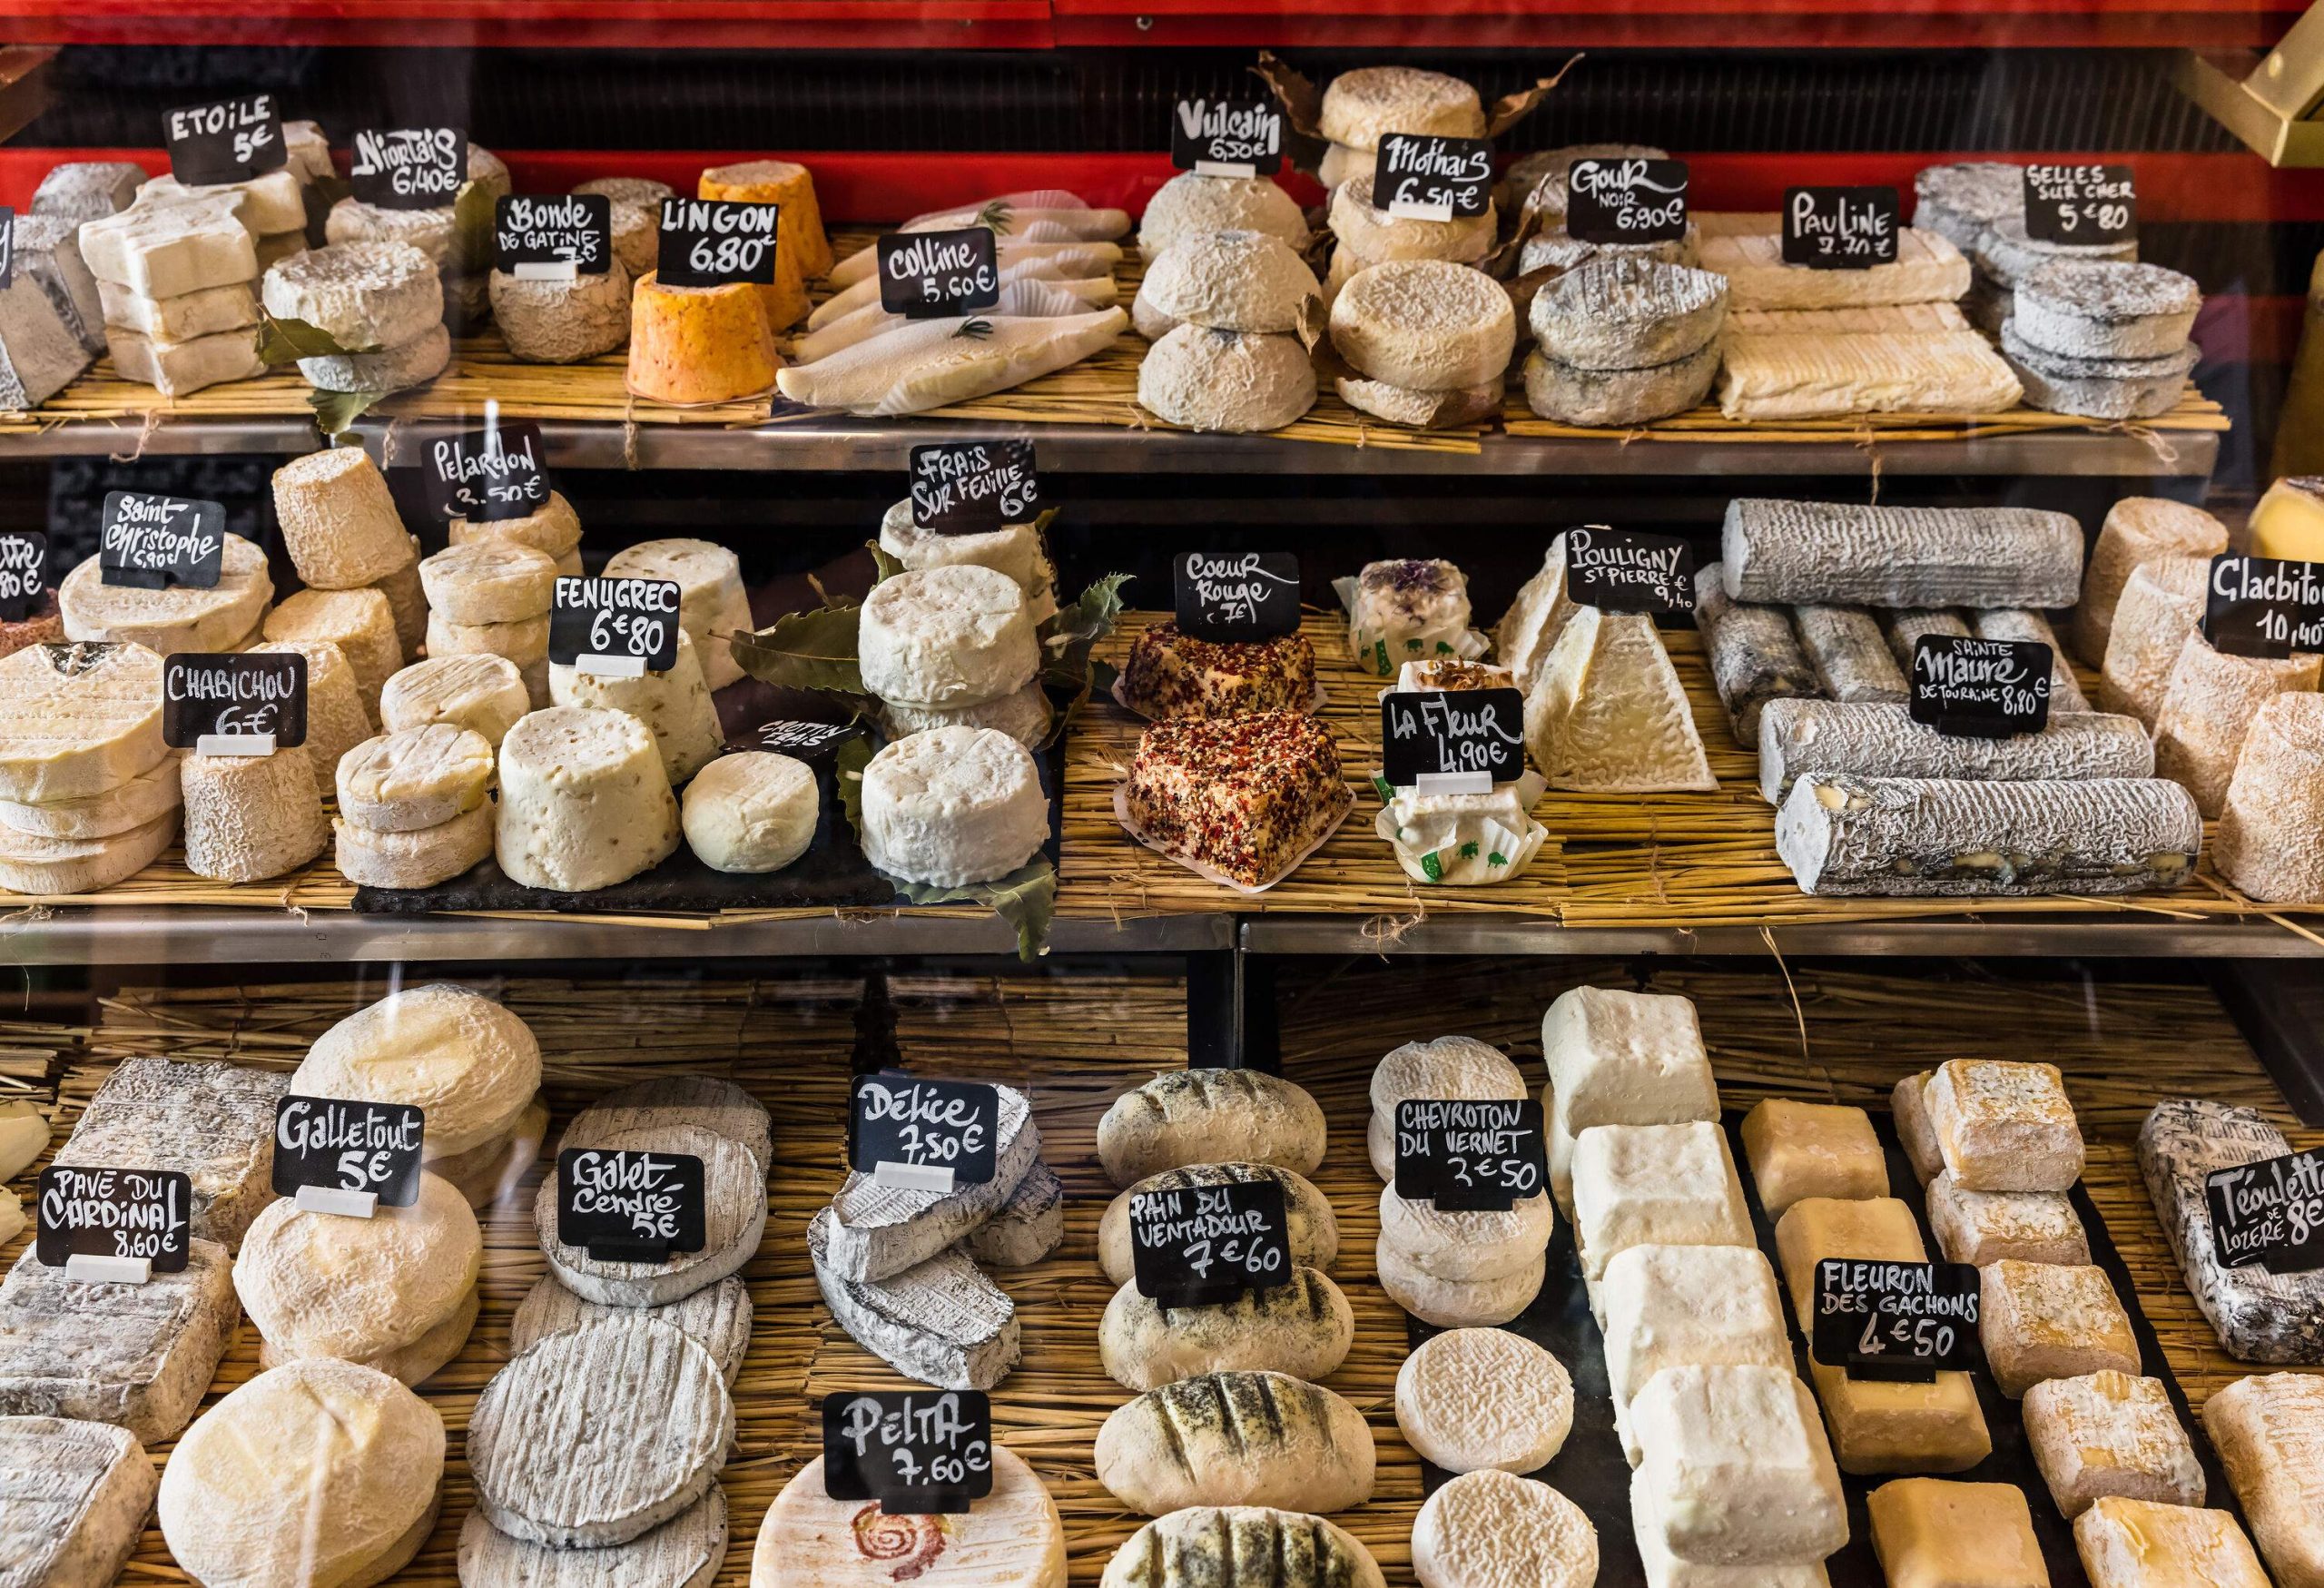 A display of assorted cheese with individual labels and pricing.